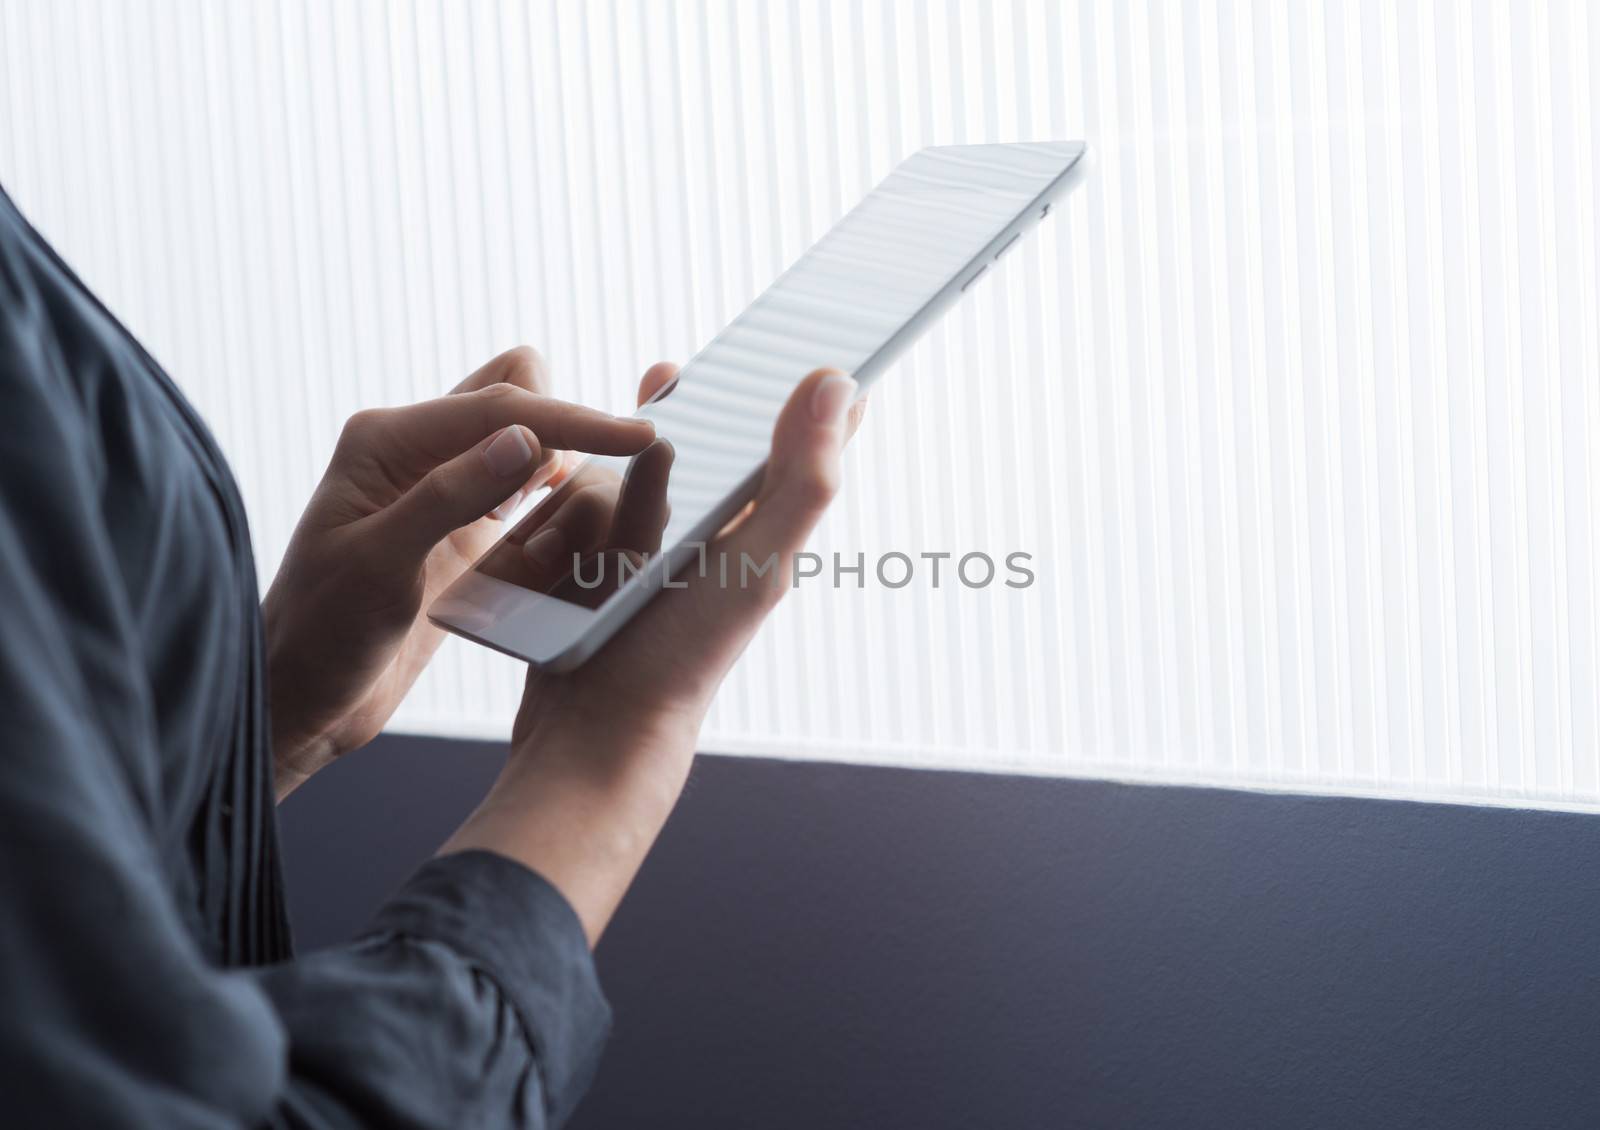 Woman using a digital tablet in front of a window, hands close-up.